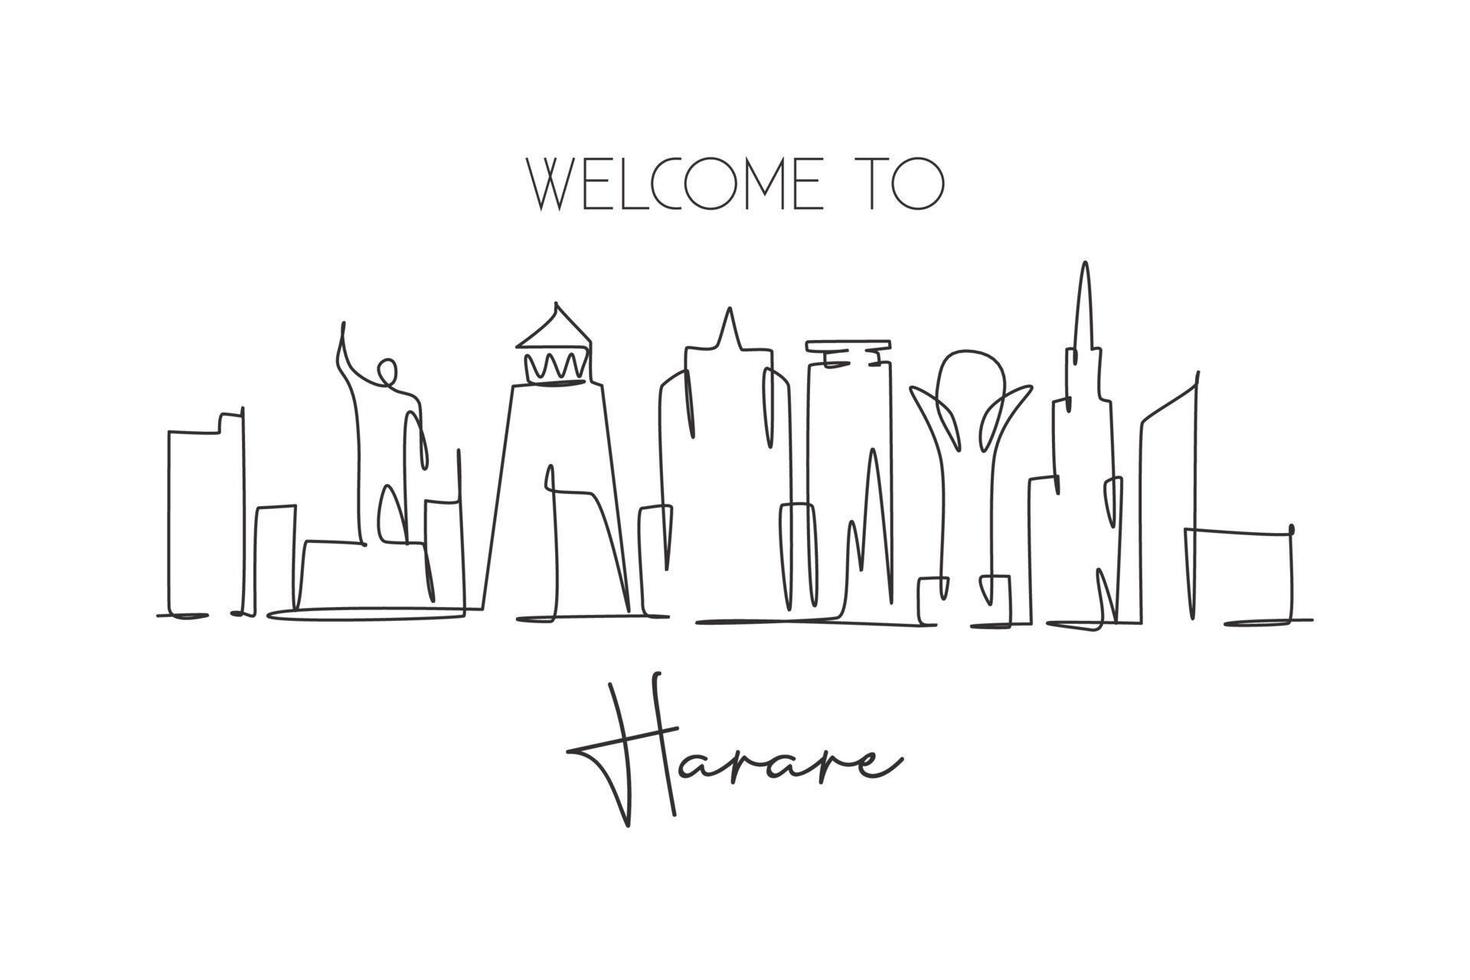 Single continuous line drawing of Harare city skyline, Zimbabwe. Famous city scraper landscape home decor wall art poster print. World travel concept. Modern one line draw design vector illustration